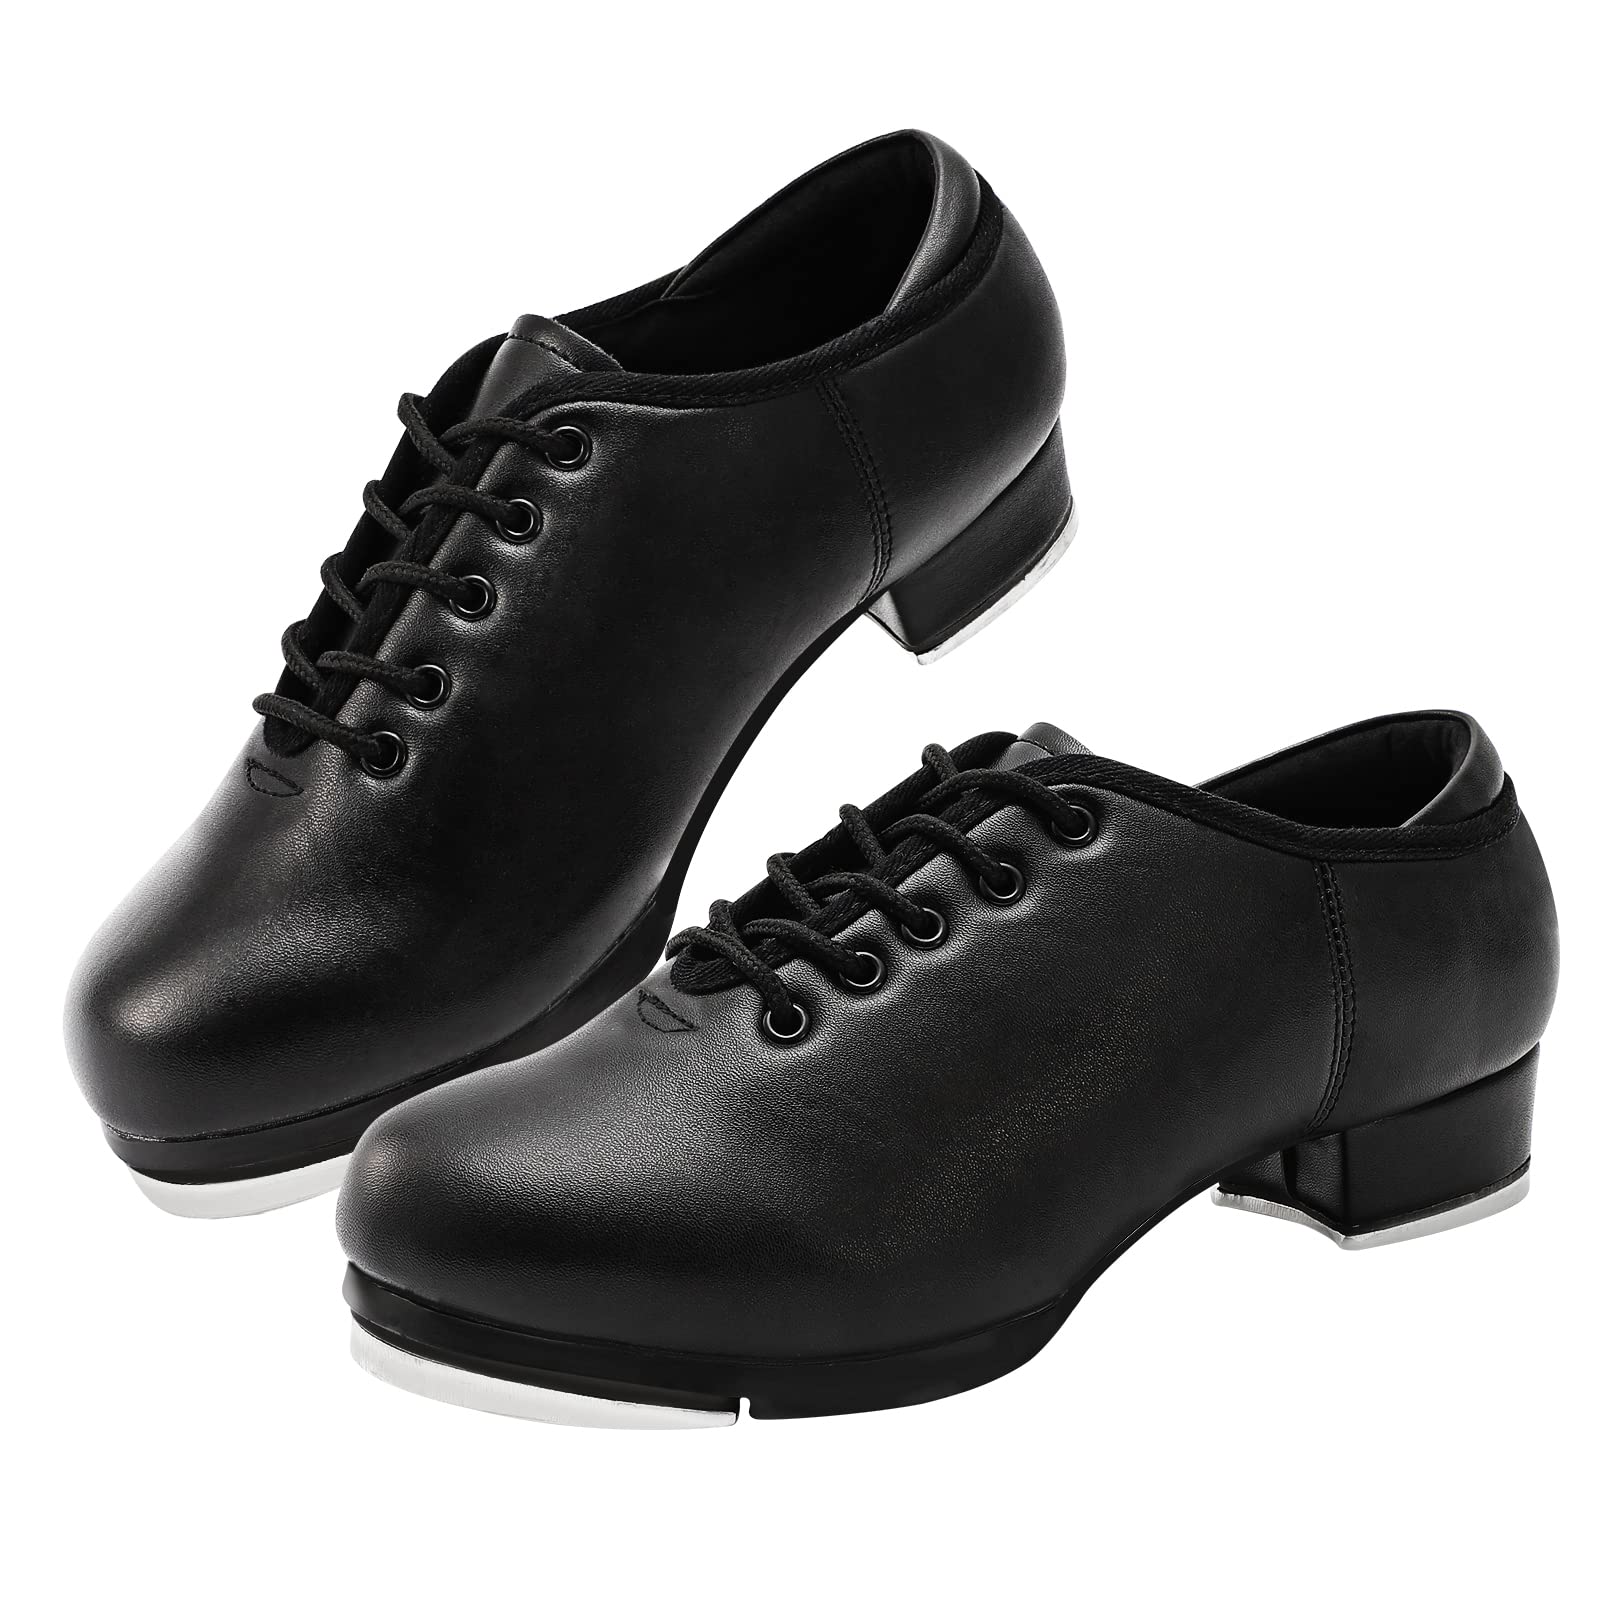 Child Jazz Tap Dance Shoes for Unisex Girls and Boys (Toddler/Little Kid/Big Kid)